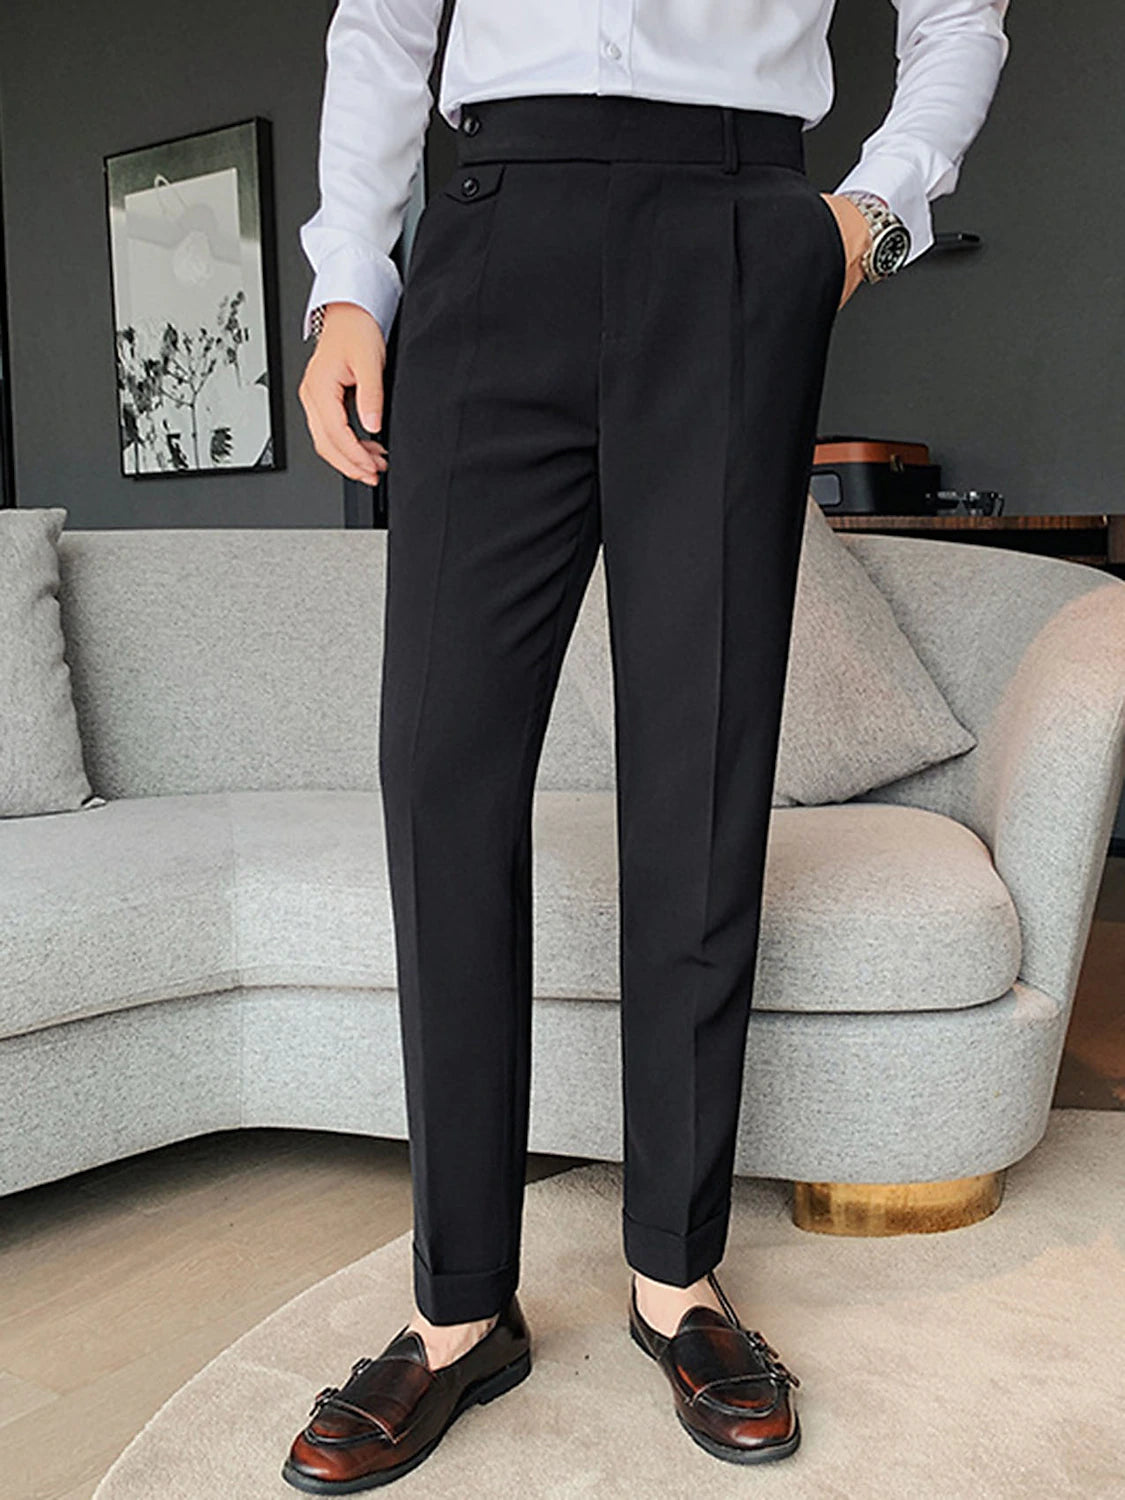 Elegant Vintage Pleated Dress Trousers for Men - Comfortable Black and White Suit Pants for Outdoor and Daily Wear